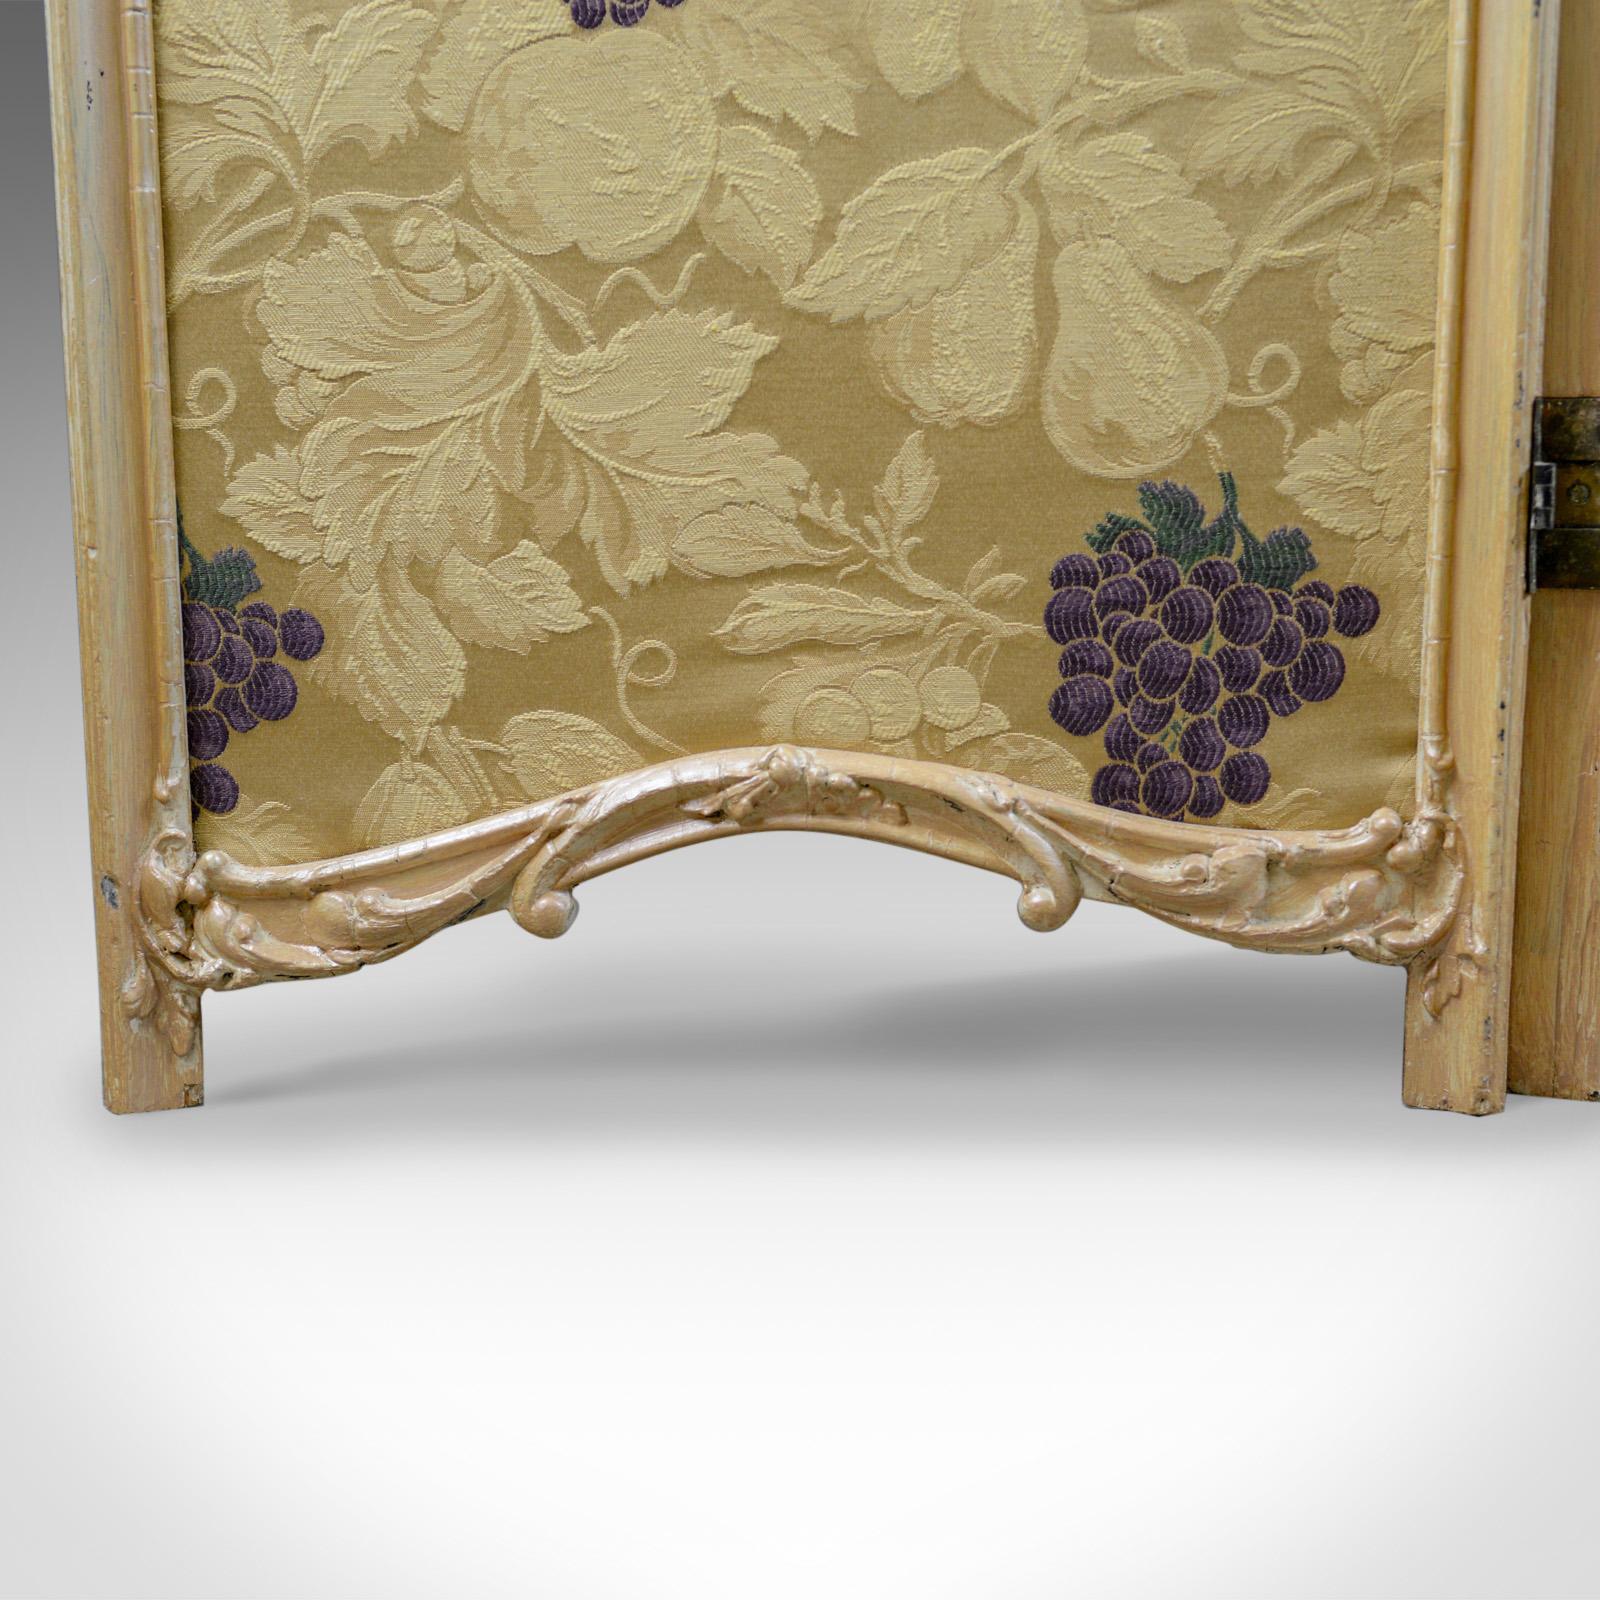 19th Century French Antique Folding Screen, Giltwood, Needlepoint, Room Divider, circa 1890